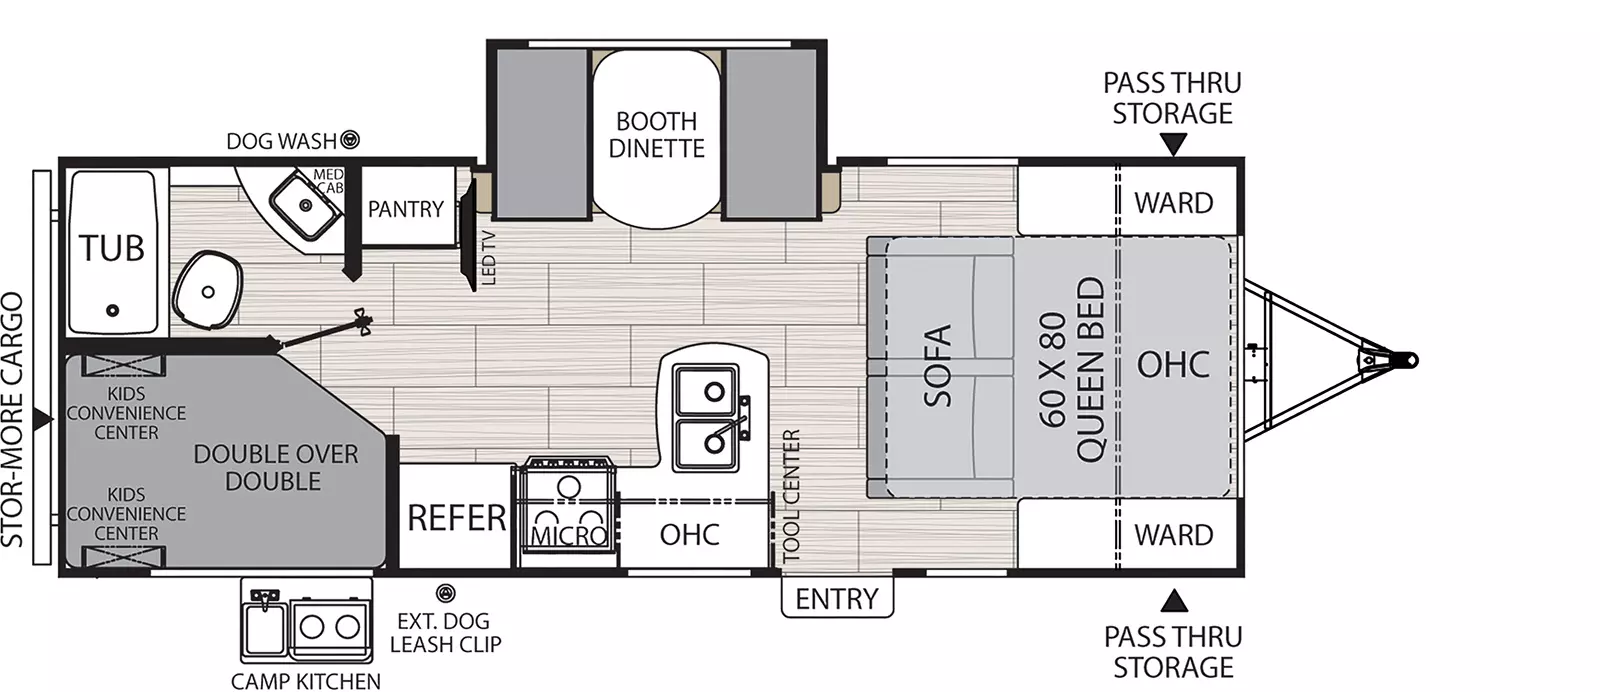 The 2146BHX has one slide out on the off-door side and one entry door on the door side. Interior layout from front to back: front bedroom with foot facing queen murphy bed, wardrobes on either side of the bed, and overhead cabinet; sofa; kitchen living dining area with off-door side slide out containing booth dinette; door side kitchen containing double basin sink, overhead cabinet, cook top stove, microwave overhead, and refrigerator; off- door side pantry and television; off-door side bathroom; and door side double over double bunk beds with kids convenience centers.